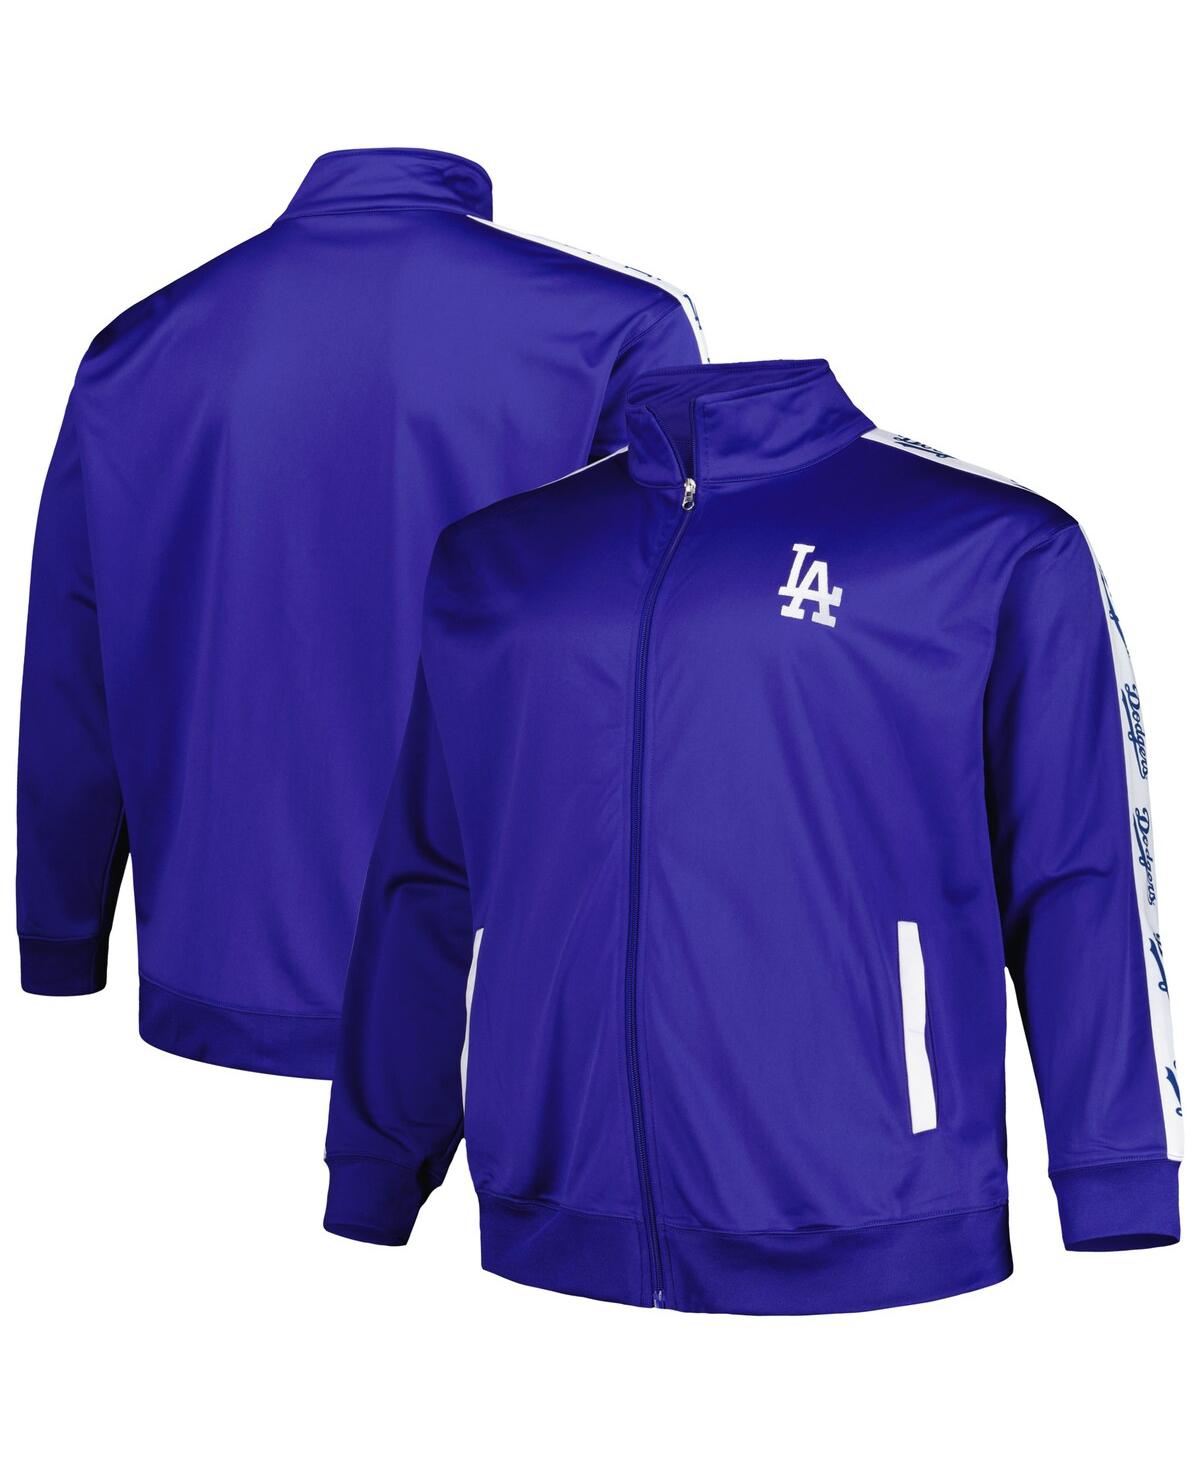 PROFILE MEN'S ROYAL LOS ANGELES DODGERS BIG AND TALL TRICOT TRACK FULL-ZIP JACKET